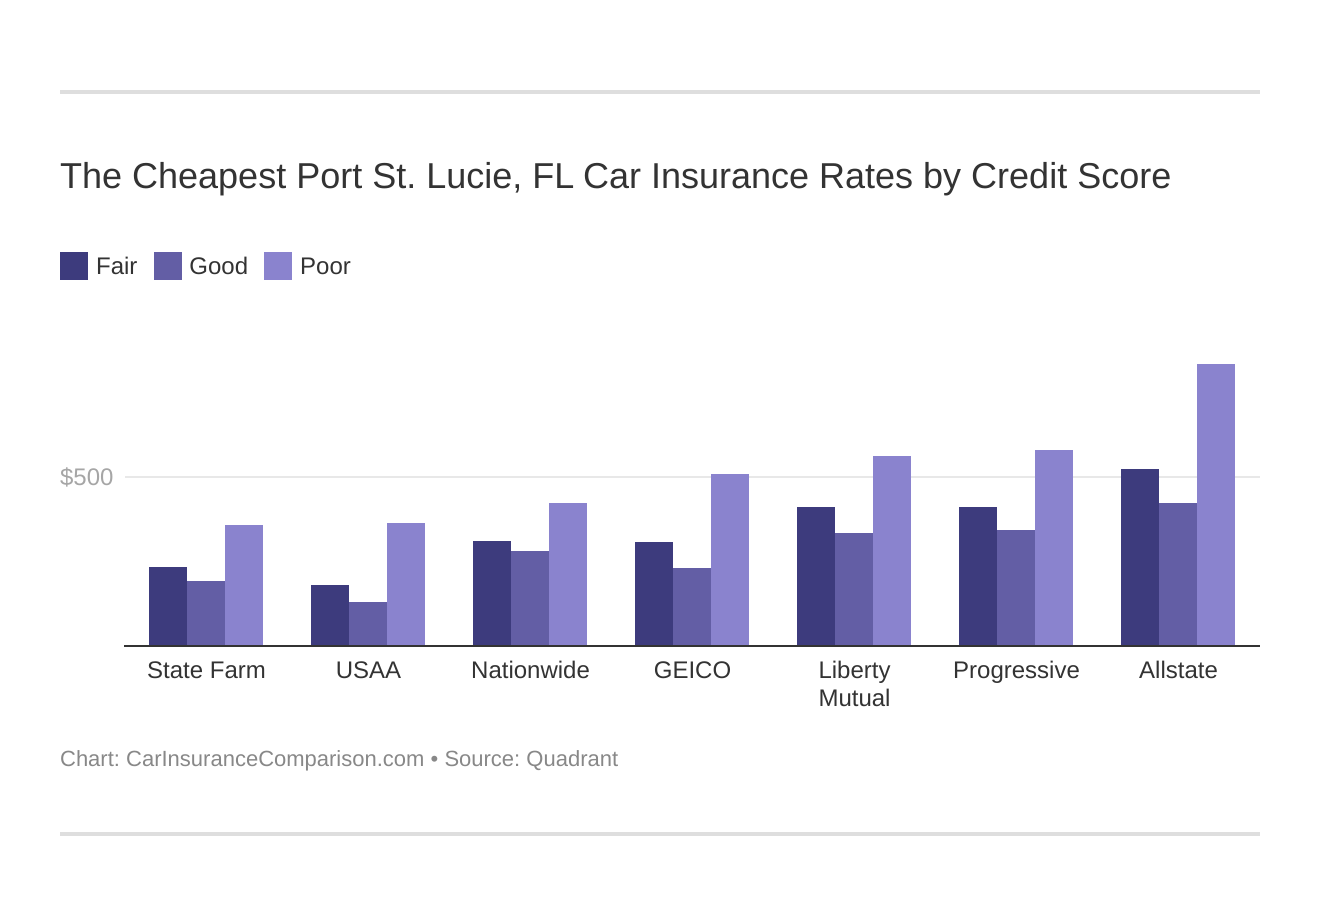 The Cheapest Port St. Lucie, FL Car Insurance Rates by Credit Score